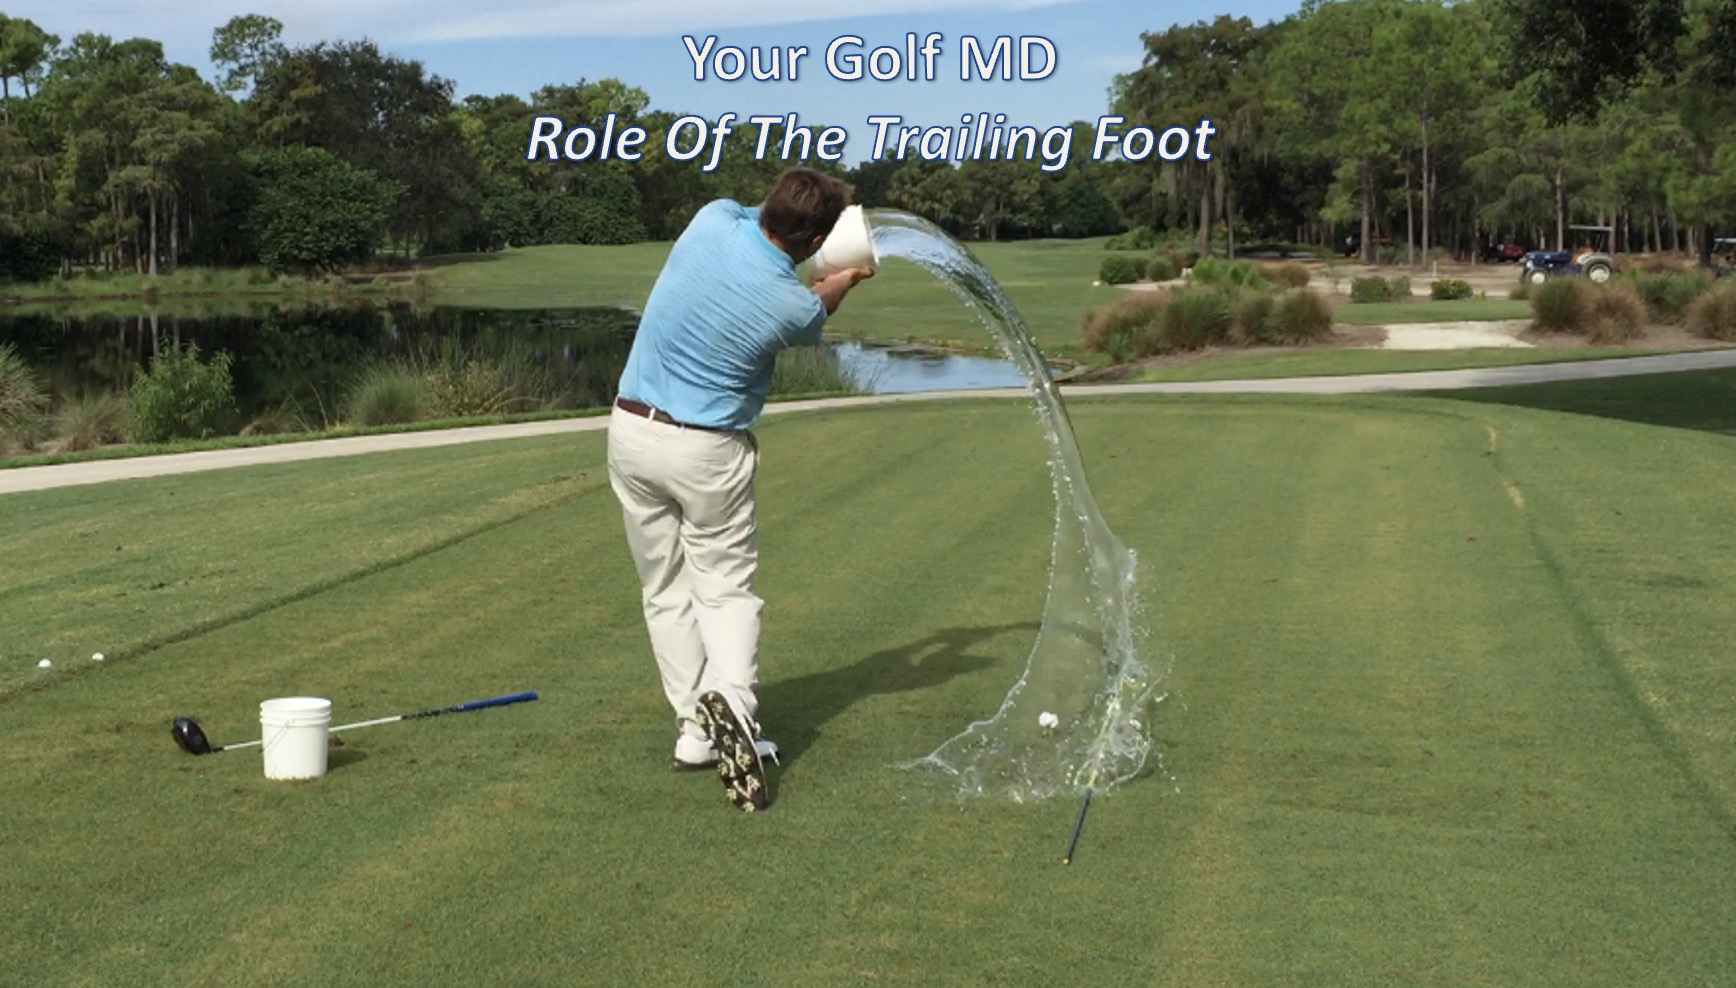 Role of the trailing foot